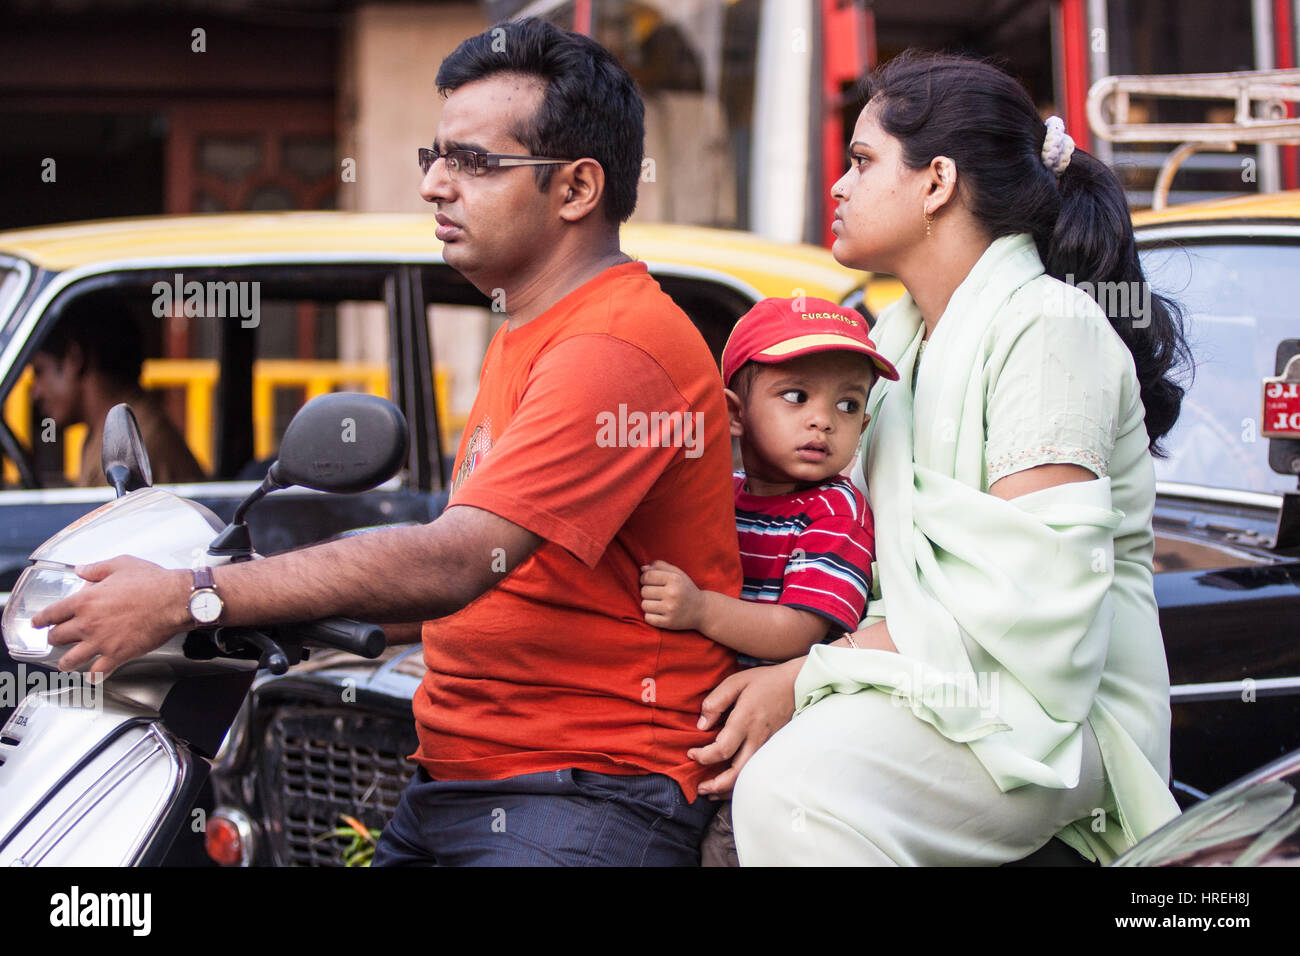 Family,on,scooter,motorbike,in,traffic,without,helmet,helmets,pollution,vehicle,fumes,no,mask,masks,health,safe,Mumbai,Bombay,India,Indian,Asia,Asian, Stock Photo